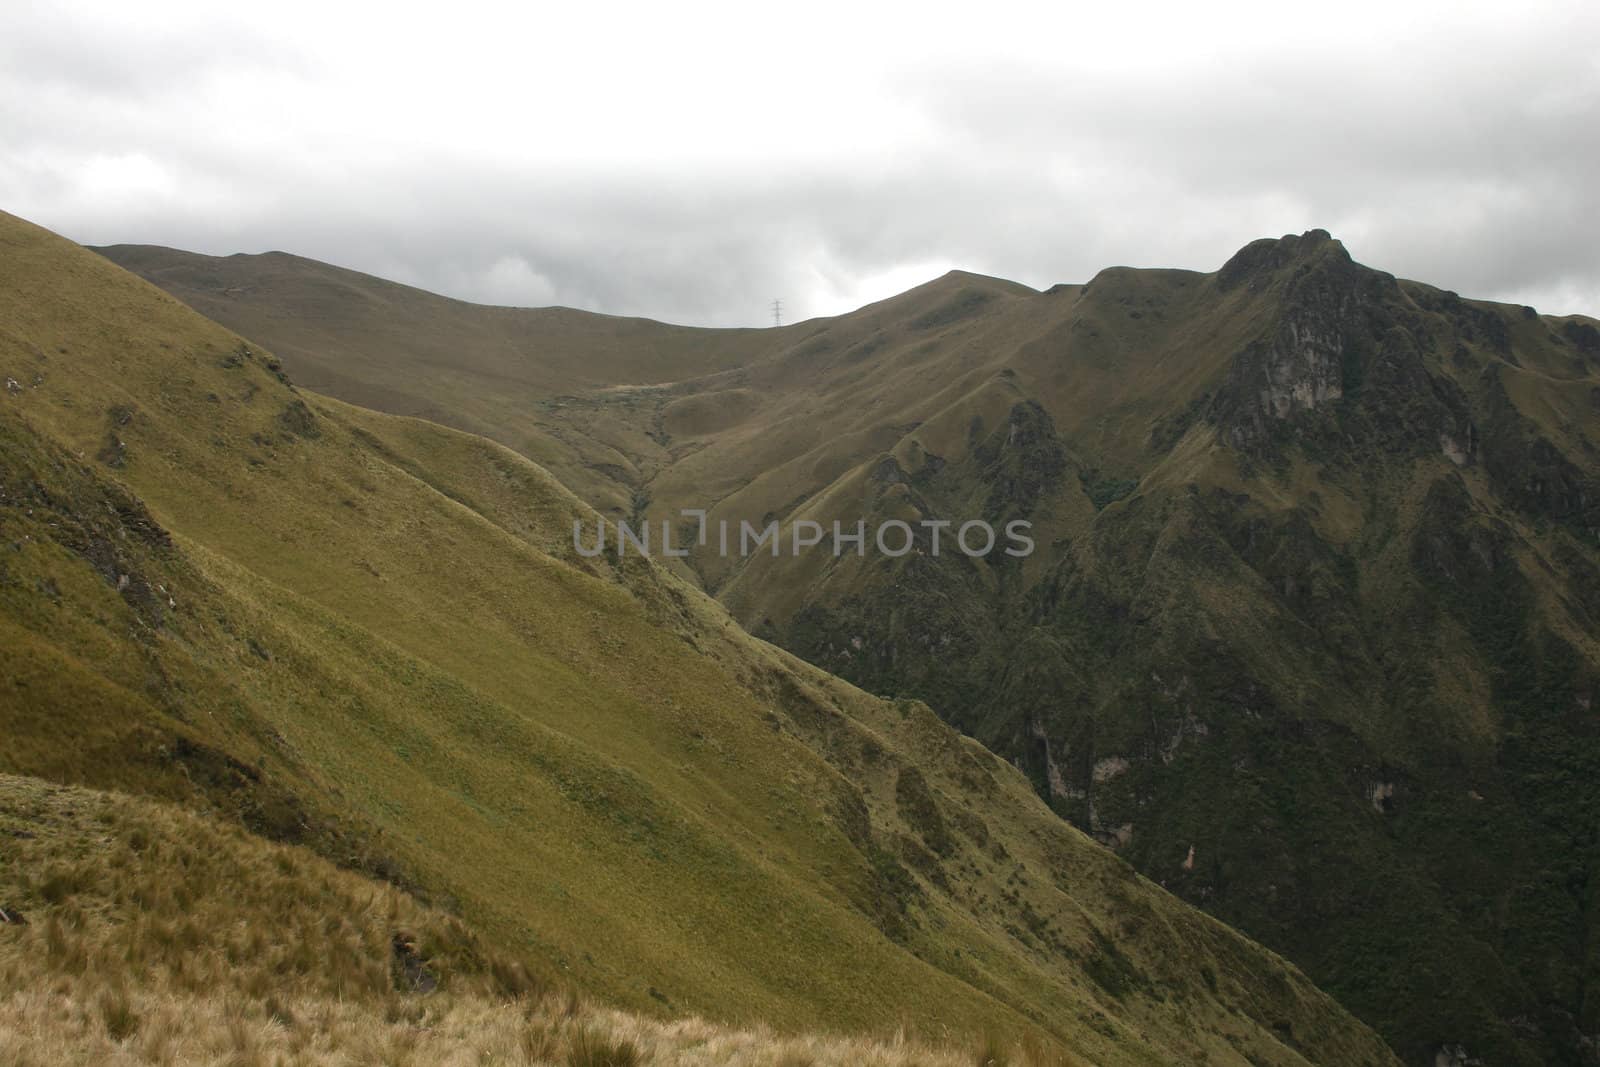 Slopes of the Pichincha in Ecuador in the Andes above the capital, Quito